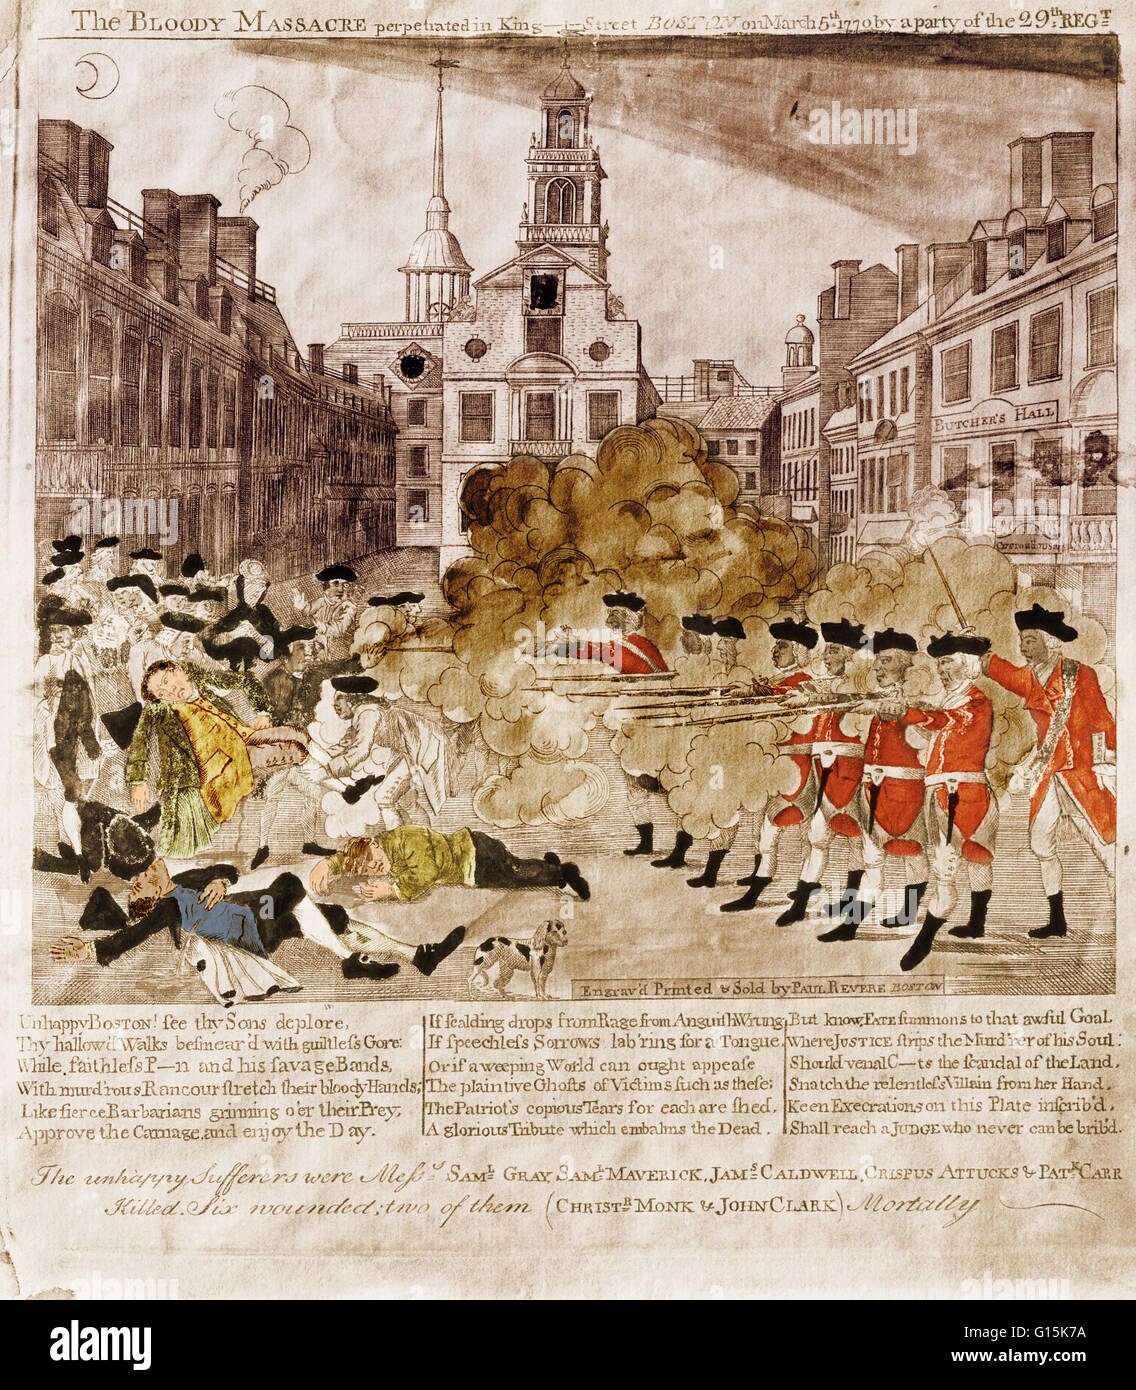 An engraving by Paul Revere of the Boston Massacre. The Boston Massacre, known as the Incident on King Street by the British, occurred on March 5, 1770, when British Army soldiers killed five male civilians and injured six others. The attack was heavily p Stock Photo